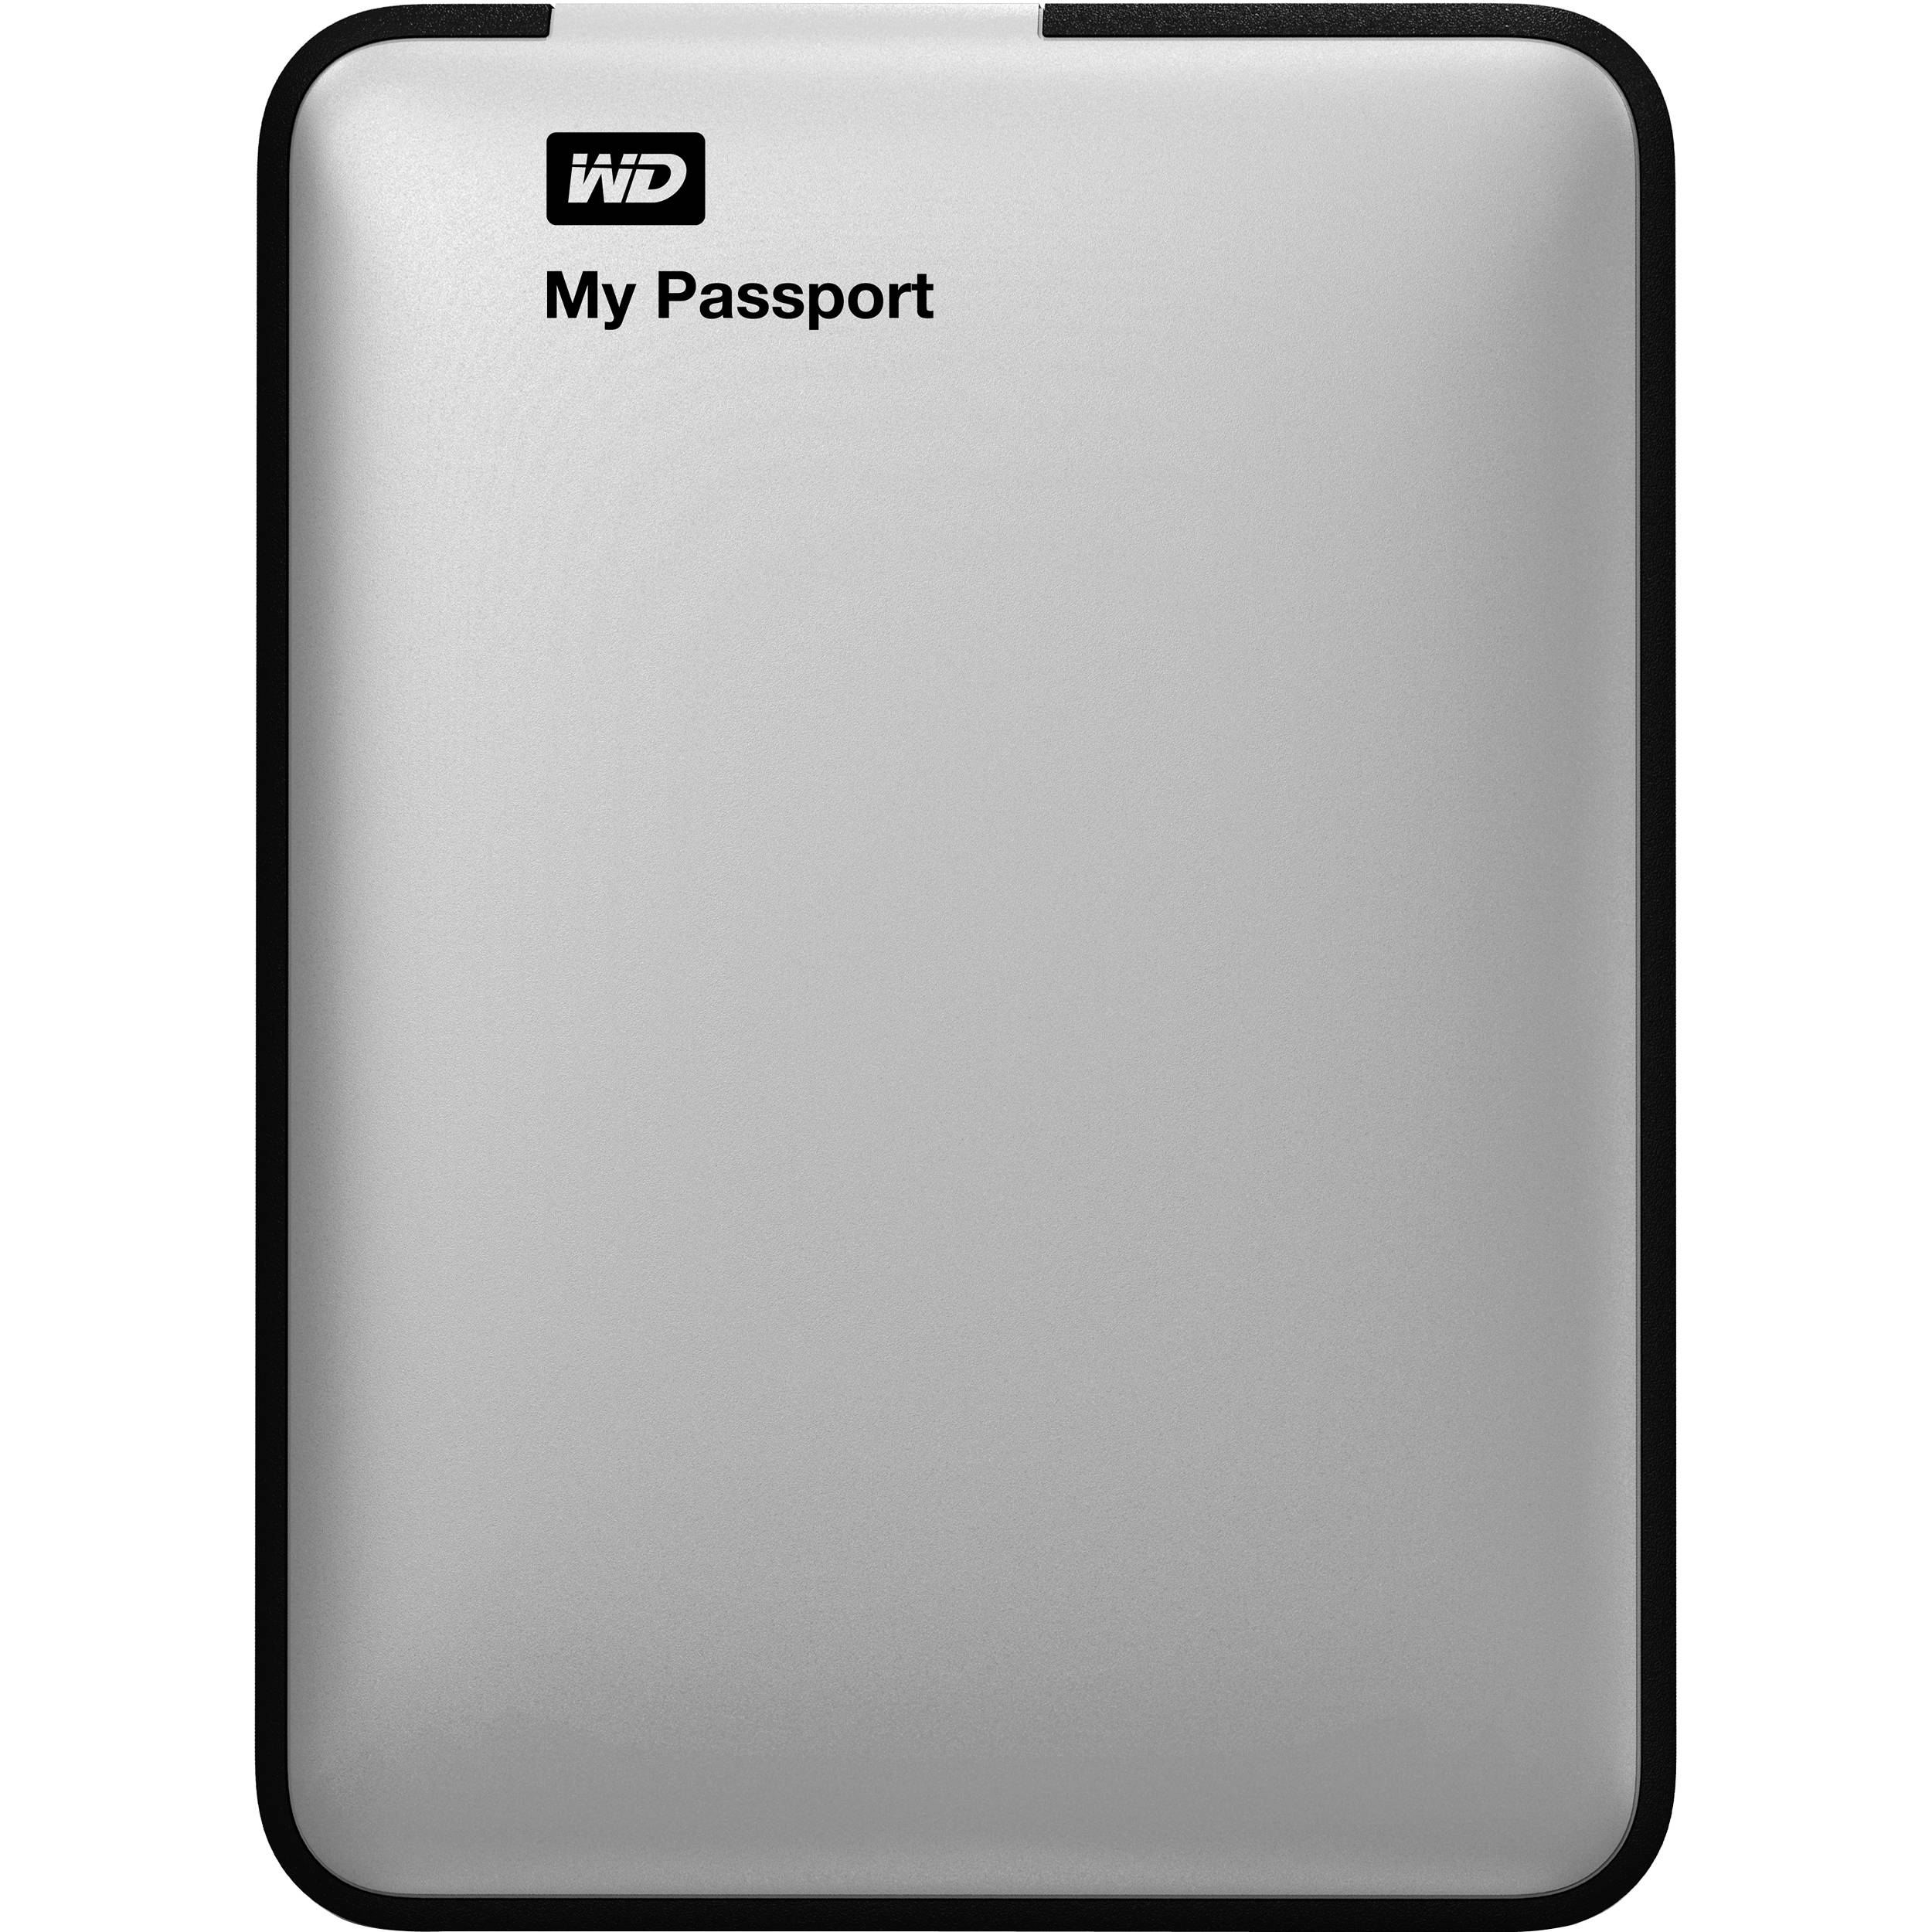 format portable hard drive for mac